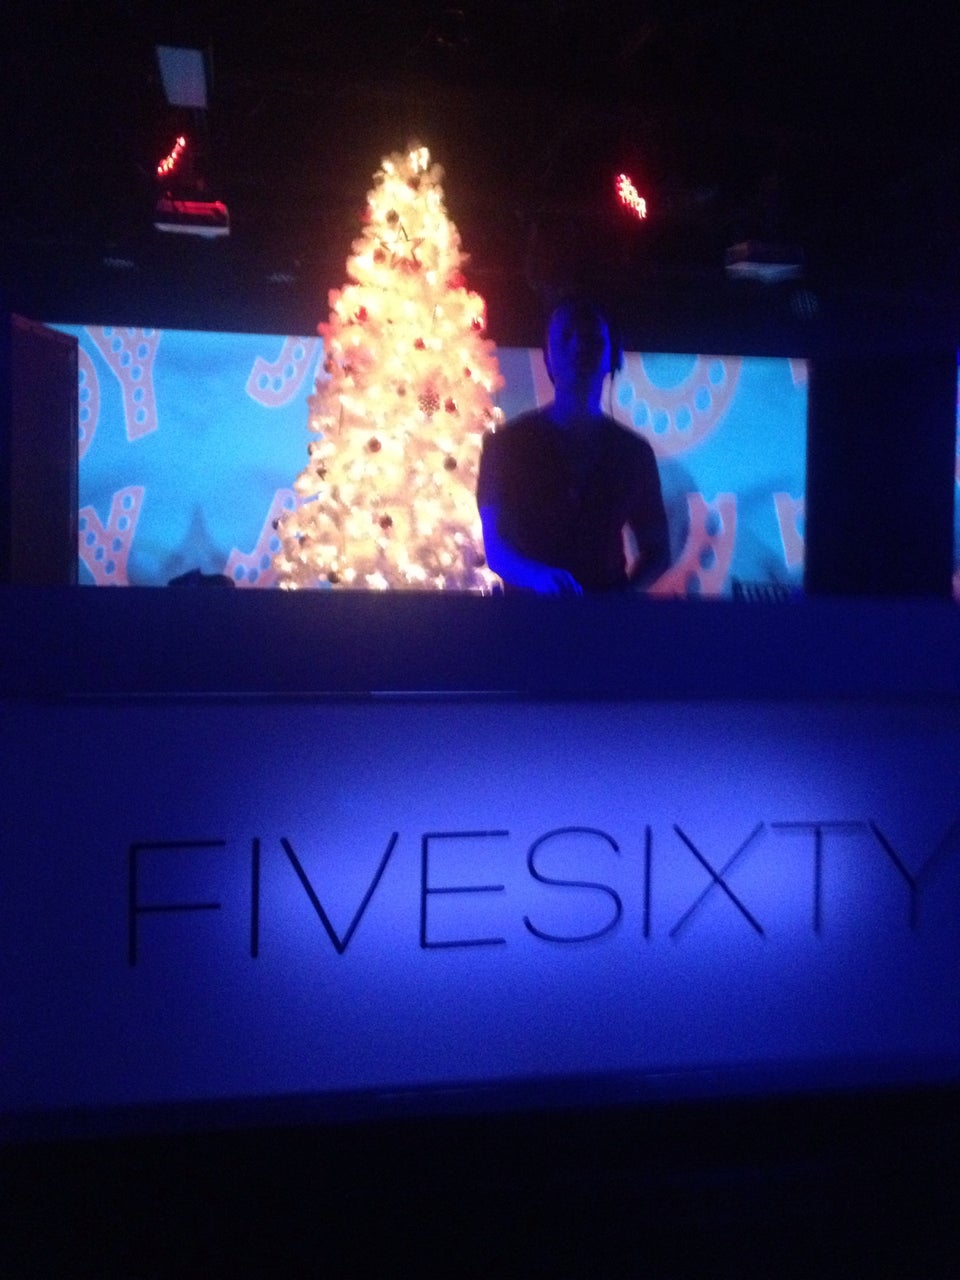 Photo of Five Sixty